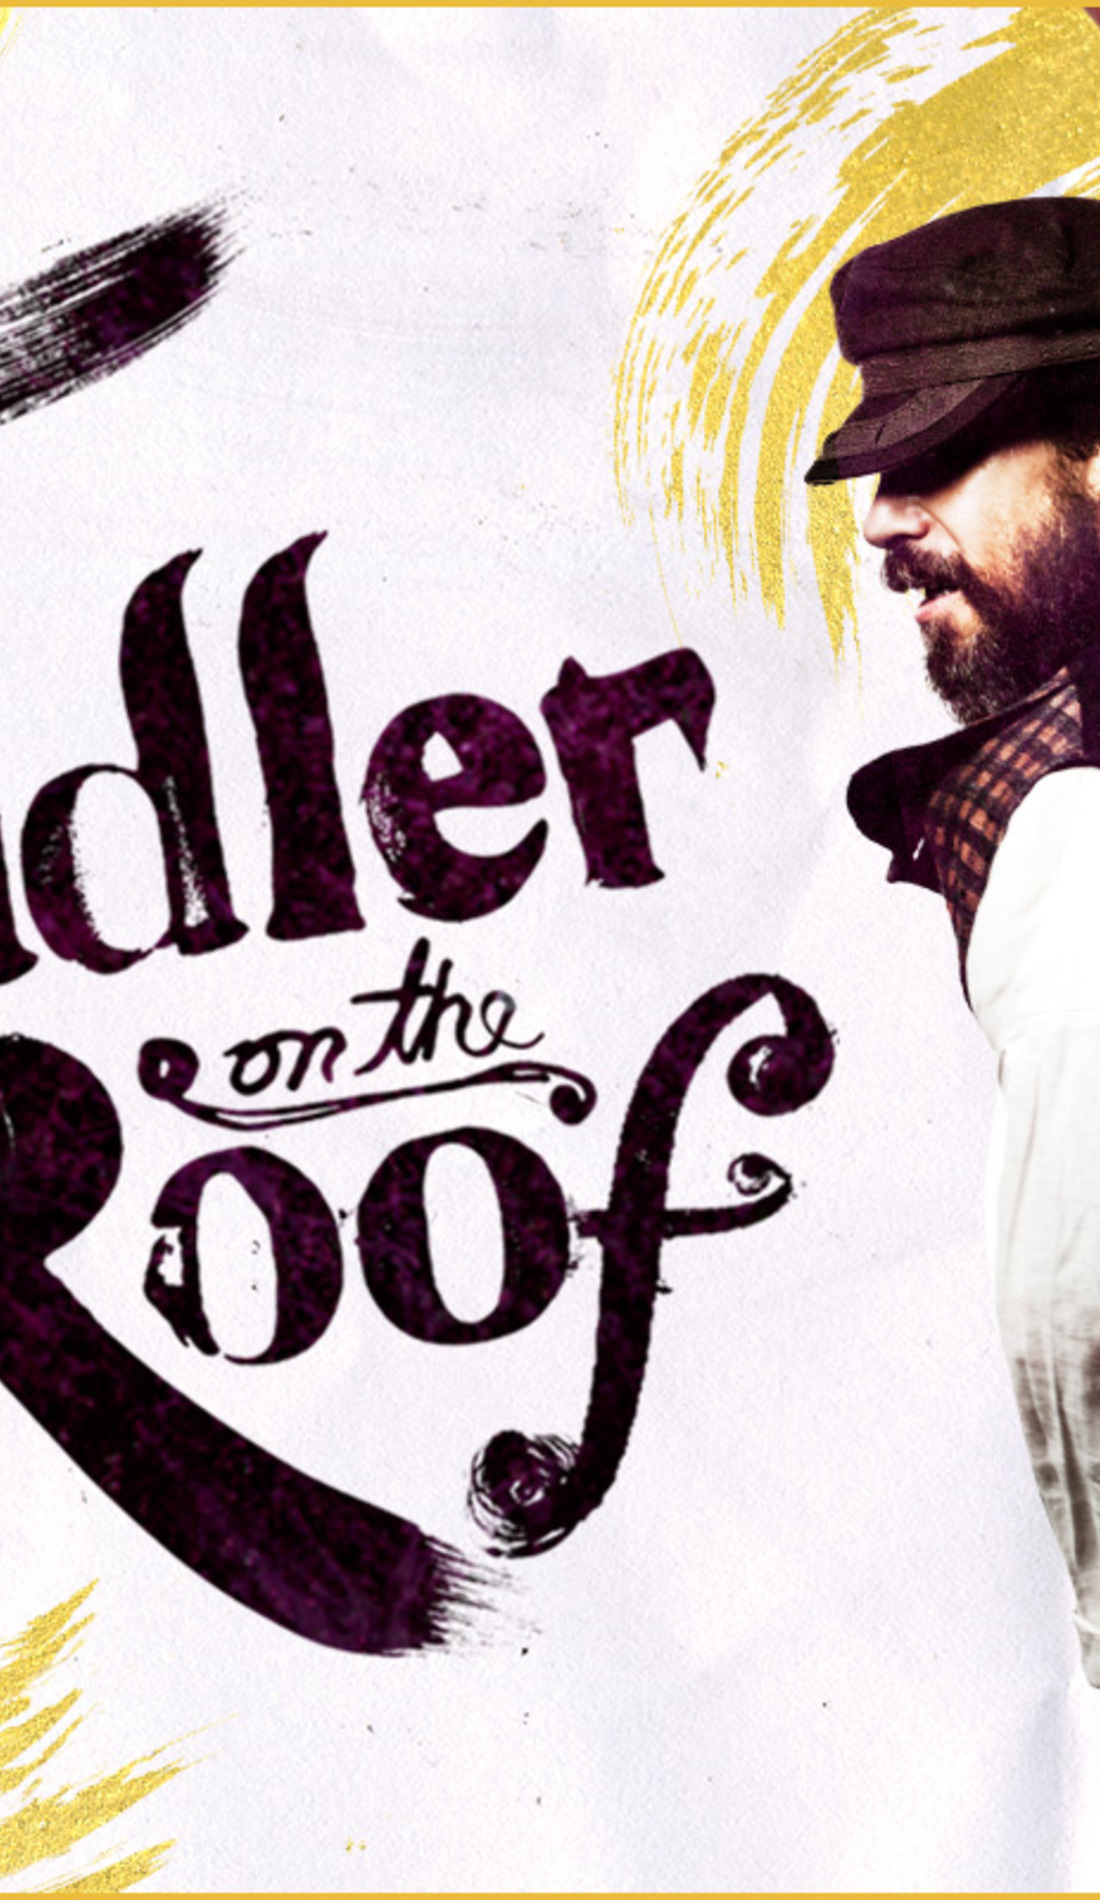 A Fiddler on the Roof live event